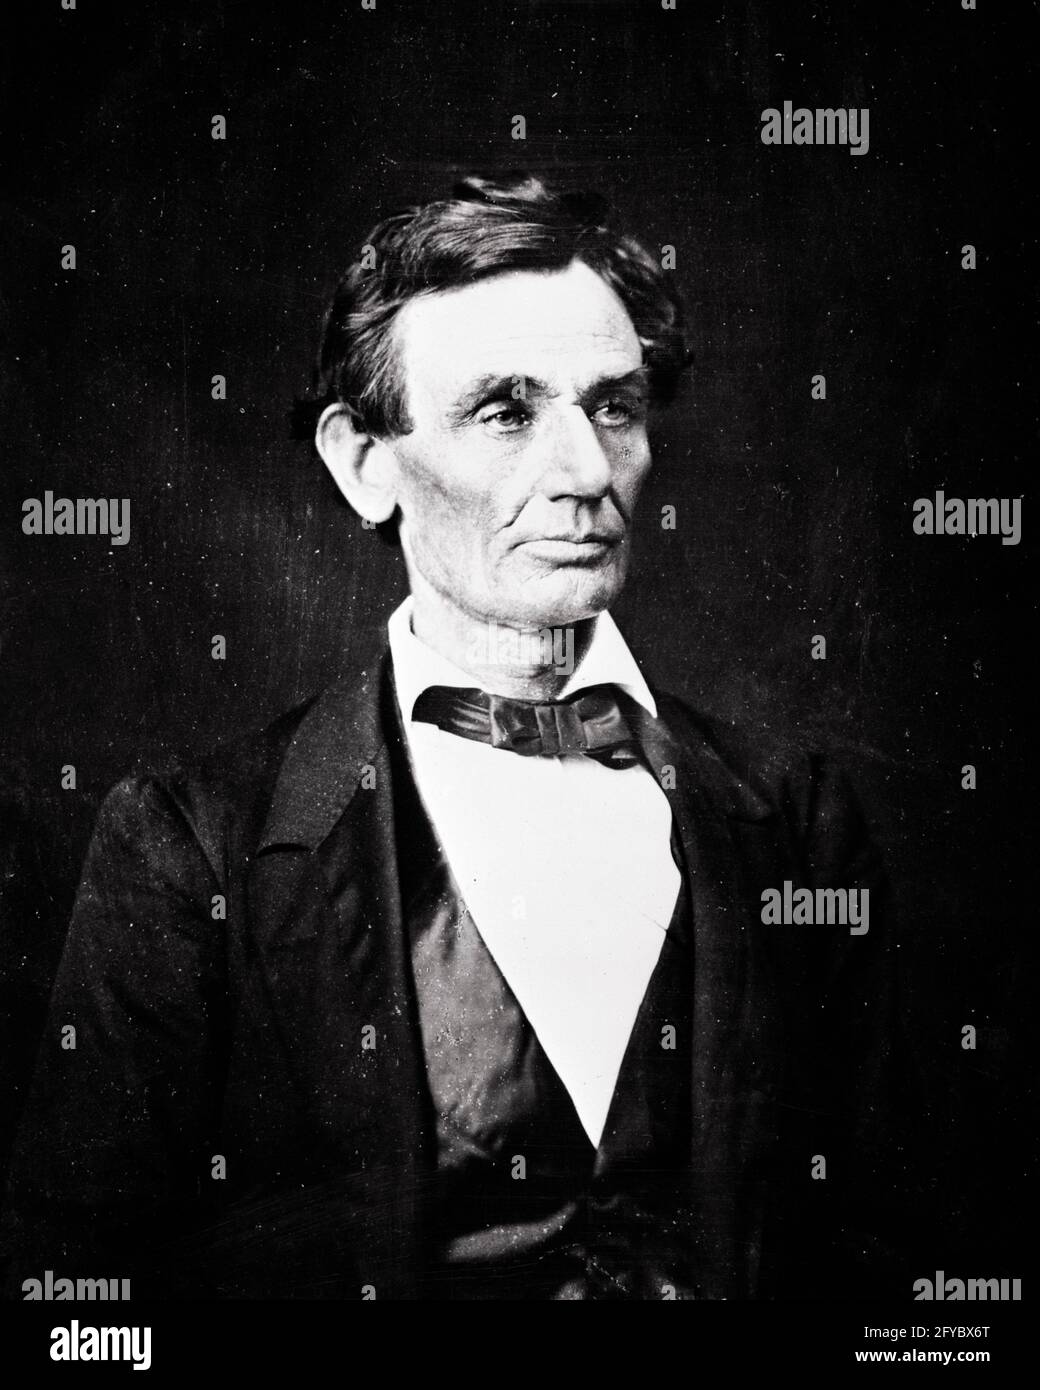 1860s ABRAHAM LINCOLN BEARDLESS IN 1860 PHOTOGRAPH TAKEN BY CANADIAN BORN PHOTOGRAPHER ALEXANDER HESLER - h7944 HAR001 HARS ABRAHAM CONFIDENCE MIDDLE-AGED B&W SADNESS NORTH AMERICA MIDDLE-AGED MAN FREEDOM NORTH AMERICAN TAKEN WARS PERSONALITY ABE SLAVERY HEAD AND SHOULDERS STRENGTH COURAGE AND REPUBLICAN FAMOUS LEADERSHIP POLITICIAN ASSASSINATED PRESIDENTIAL IN AUTHORITY EMANCIPATION FACIAL HAIR OCCUPATIONS POLITICS PRESIDENTS SPRINGFIELD 1860s STUDIOS HONEST ABE 1860 CIRCA CLEAN SHAVEN HERO MID-ADULT MID-ADULT MAN SOMBER 16TH ABRAHAM LINCOLN ALEXANDER AMERICAN CIVIL WAR BLACK AND WHITE Stock Photo